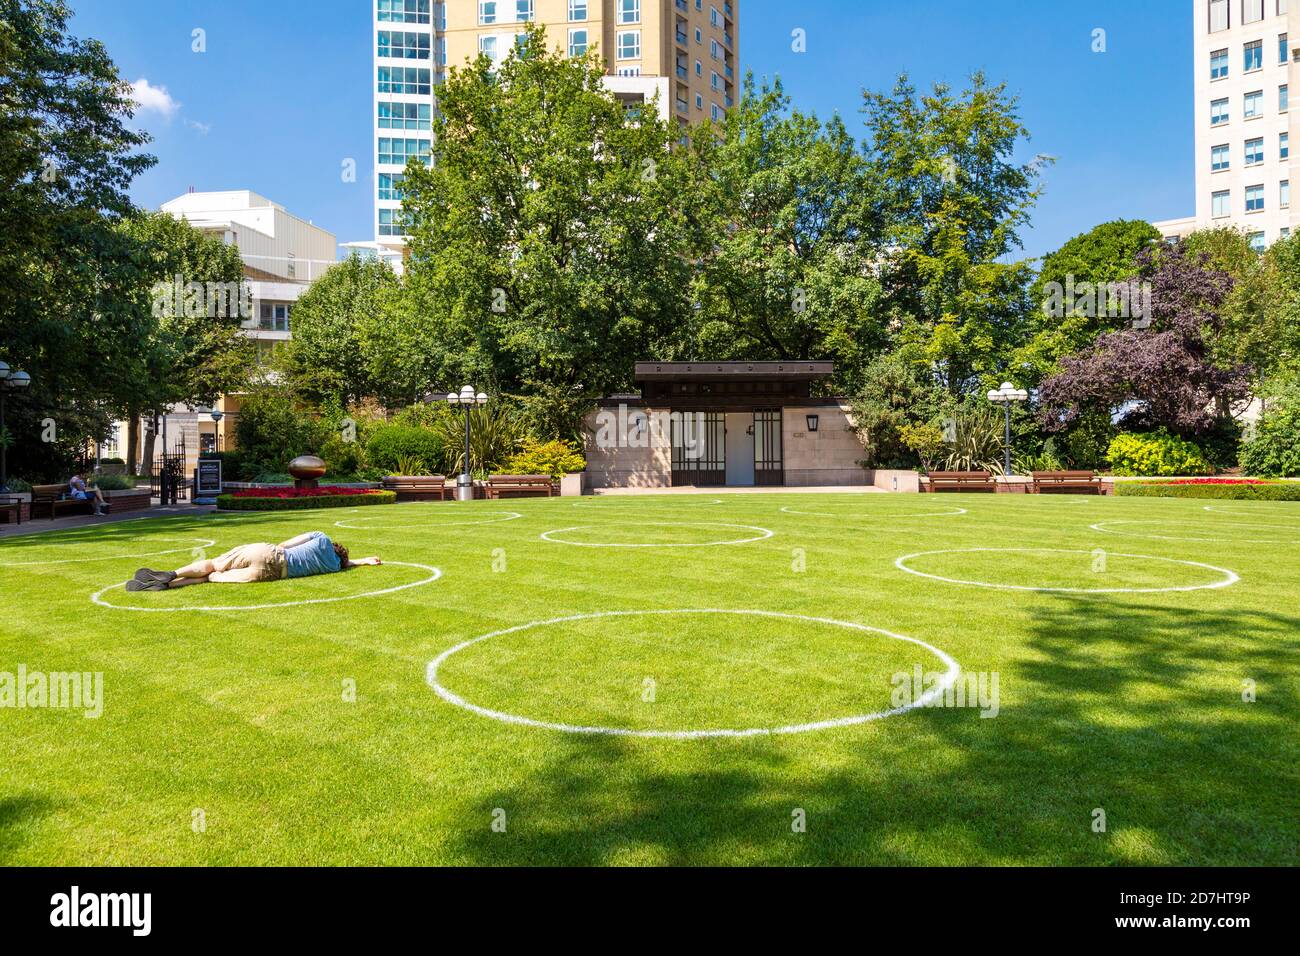 11th Aug 2020, London, UK - Circles drawn on grass at Westferry Circus, Canary Wharf to indicate social distancing spaces during coronavirus pandemic Stock Photo